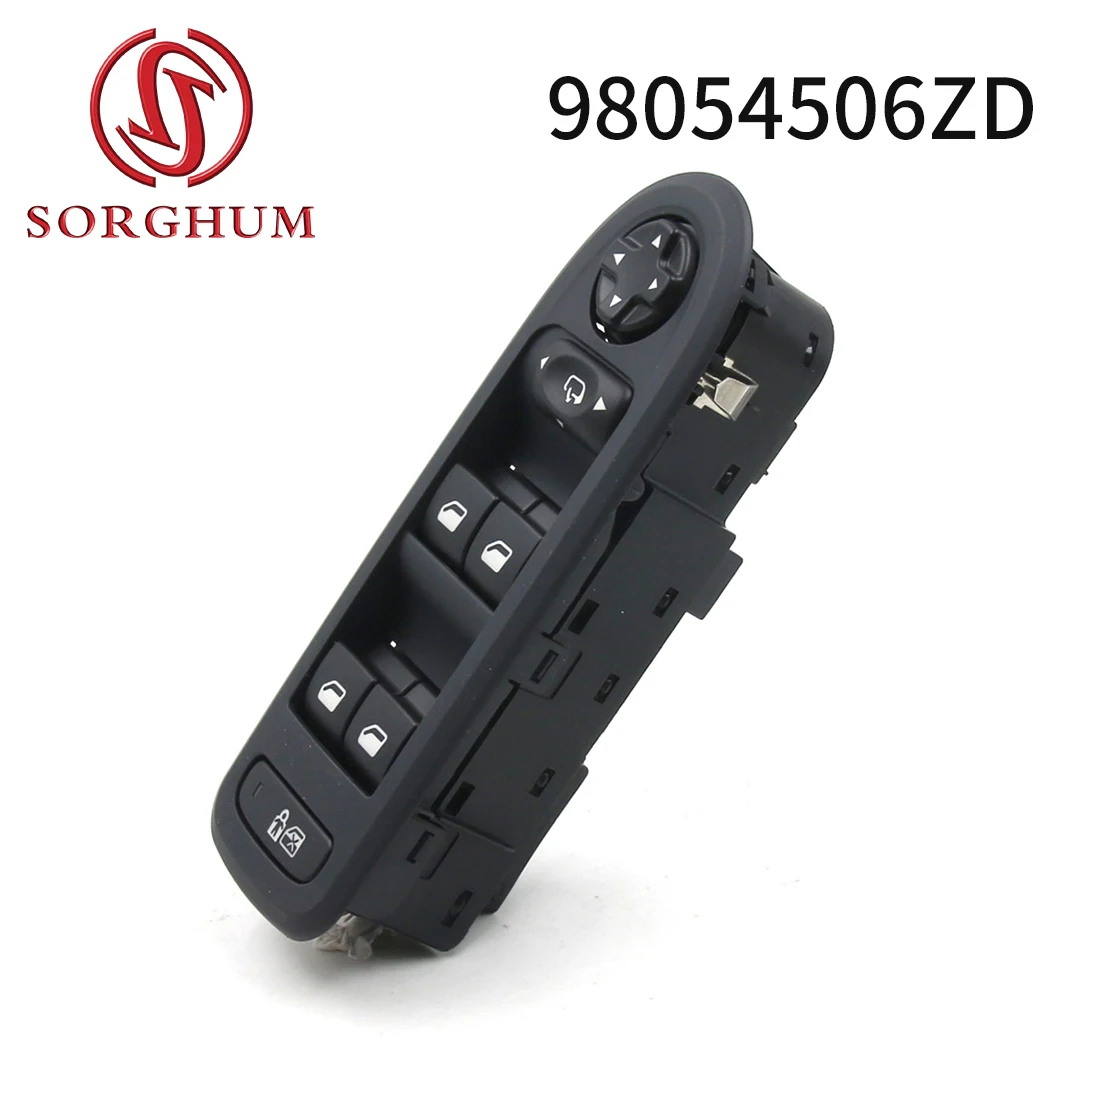 SORGHUM 98054506ZD For 2009-13 Peugeot 408 508 Citroen C5 Auto Car Left Front Lifter Power Window Switch 98053458ZE Replacement